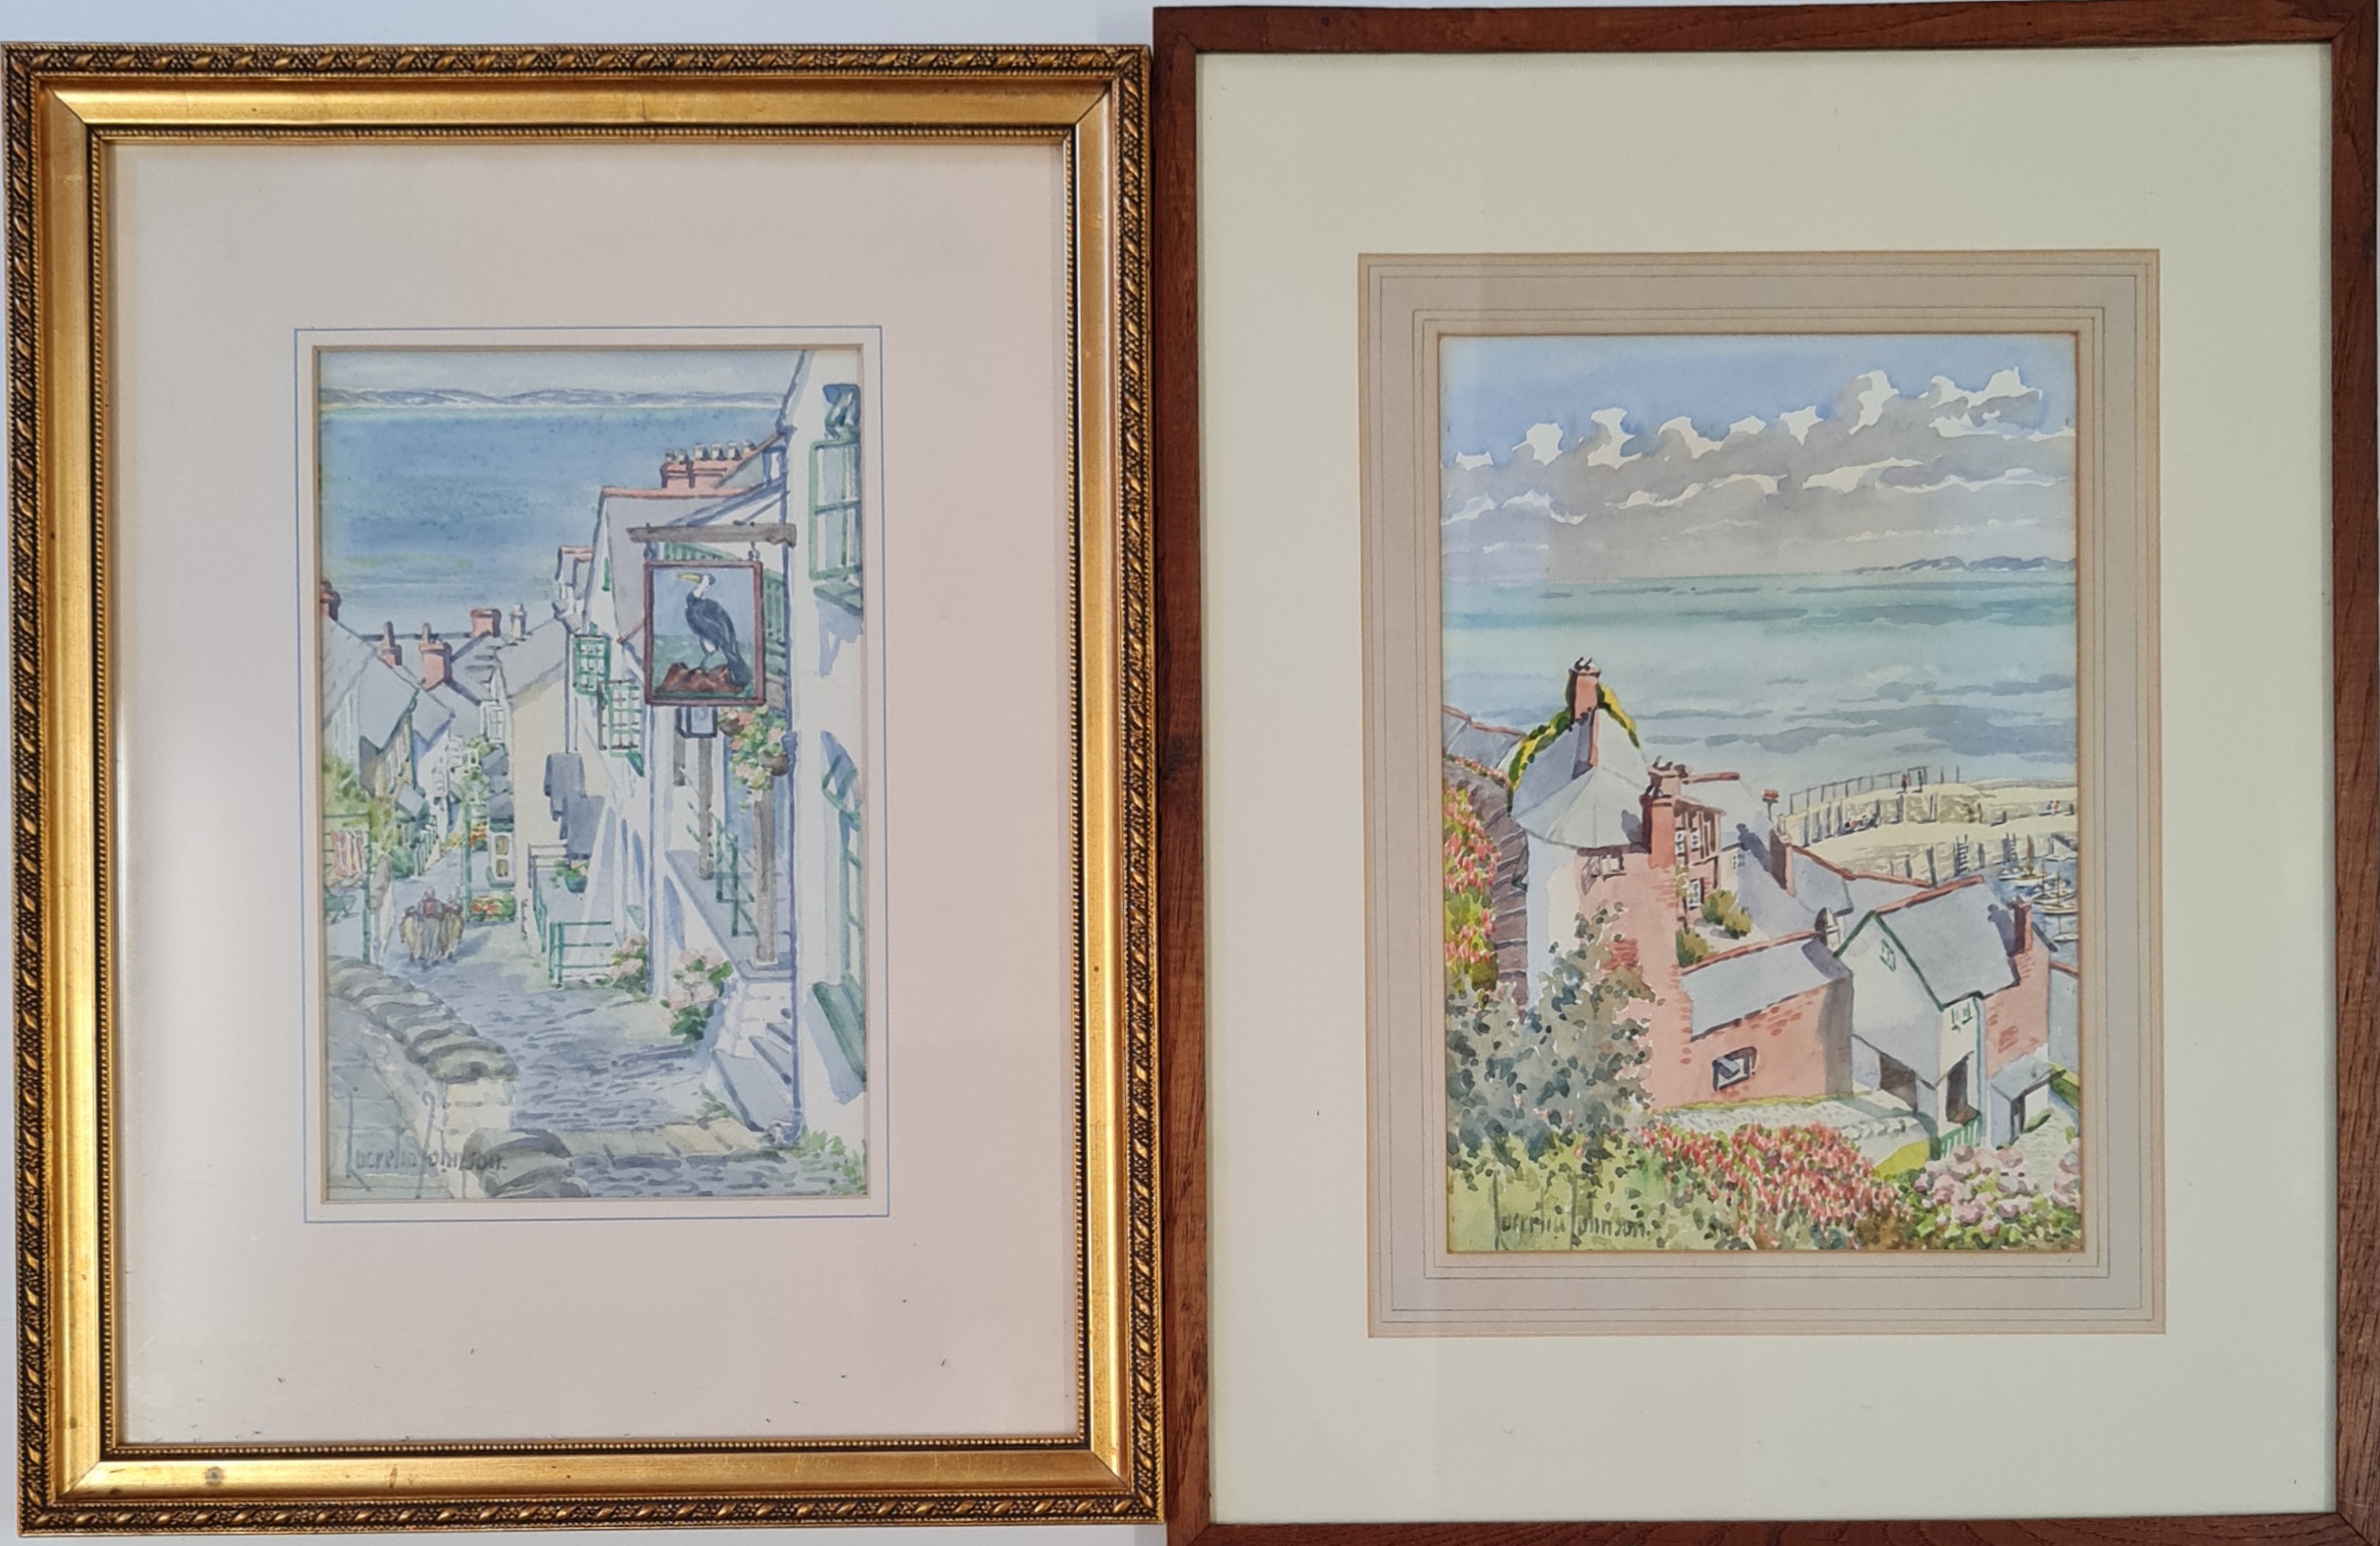 LUCRETIA JOHNSON. Two framed, signed, watercolour on paper, coastal town scenes, approx. 24cm x